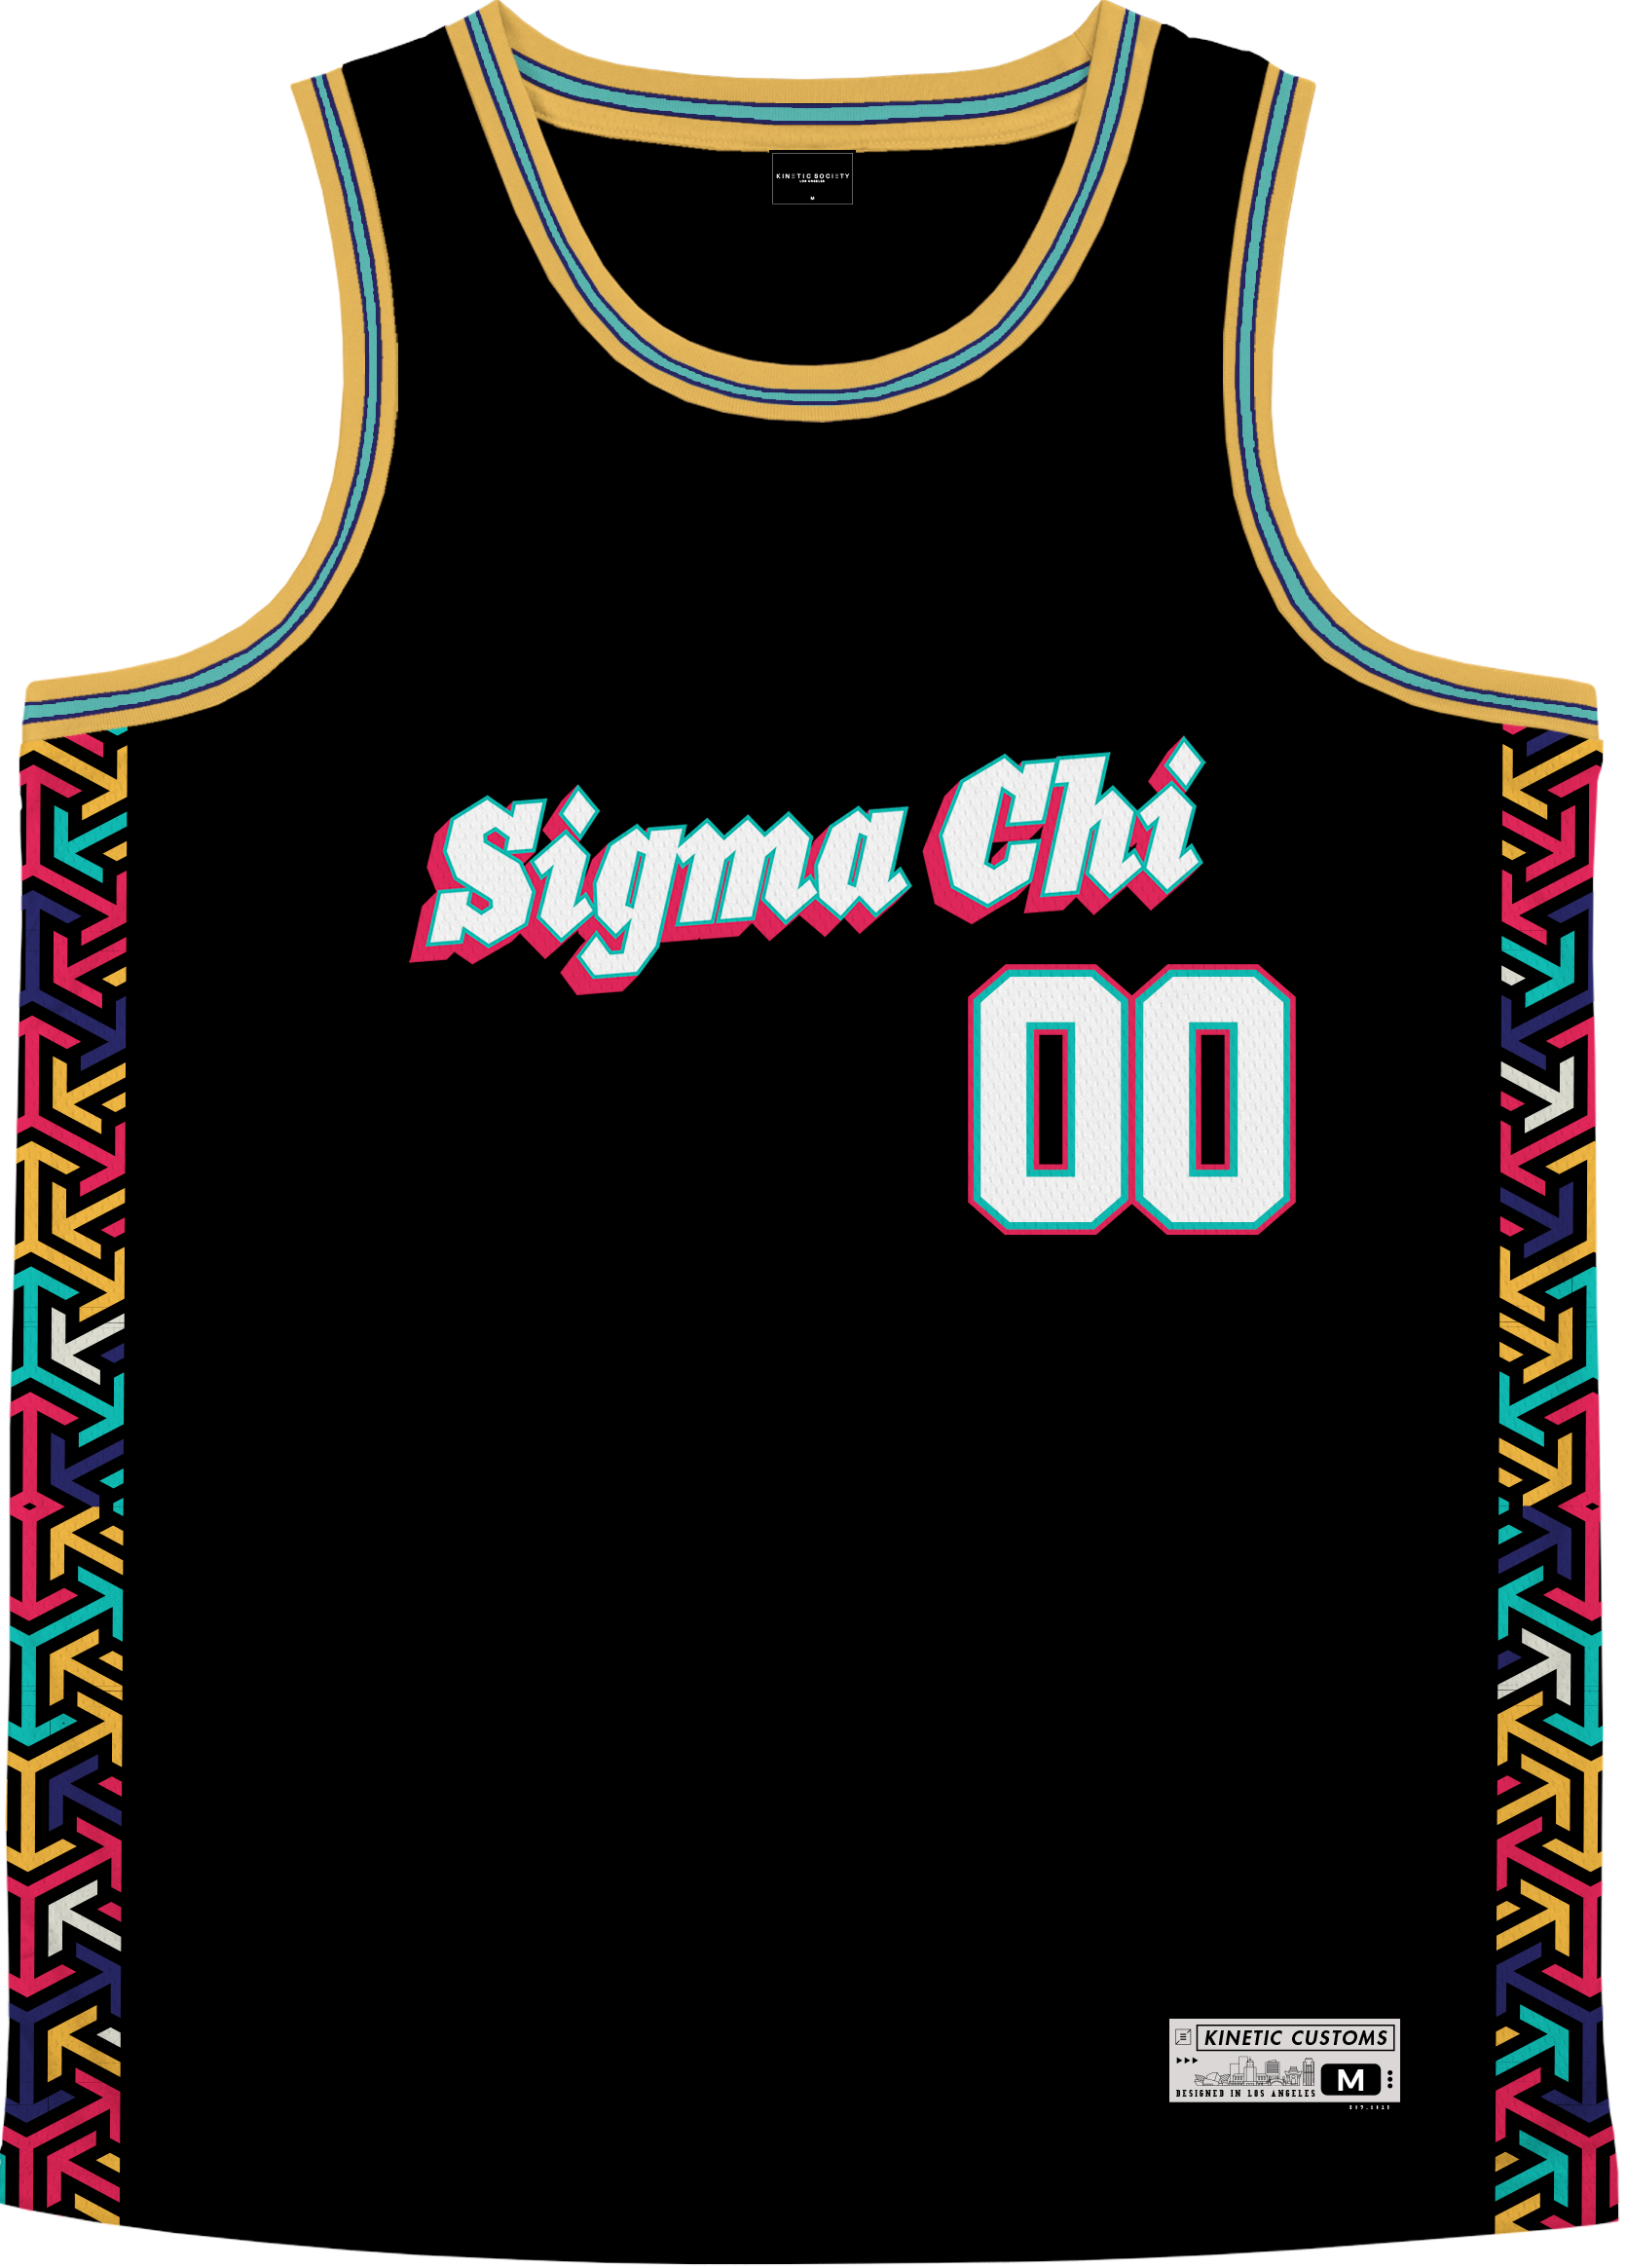 SIGMA CHI - Cubic Arrows Basketball Jersey